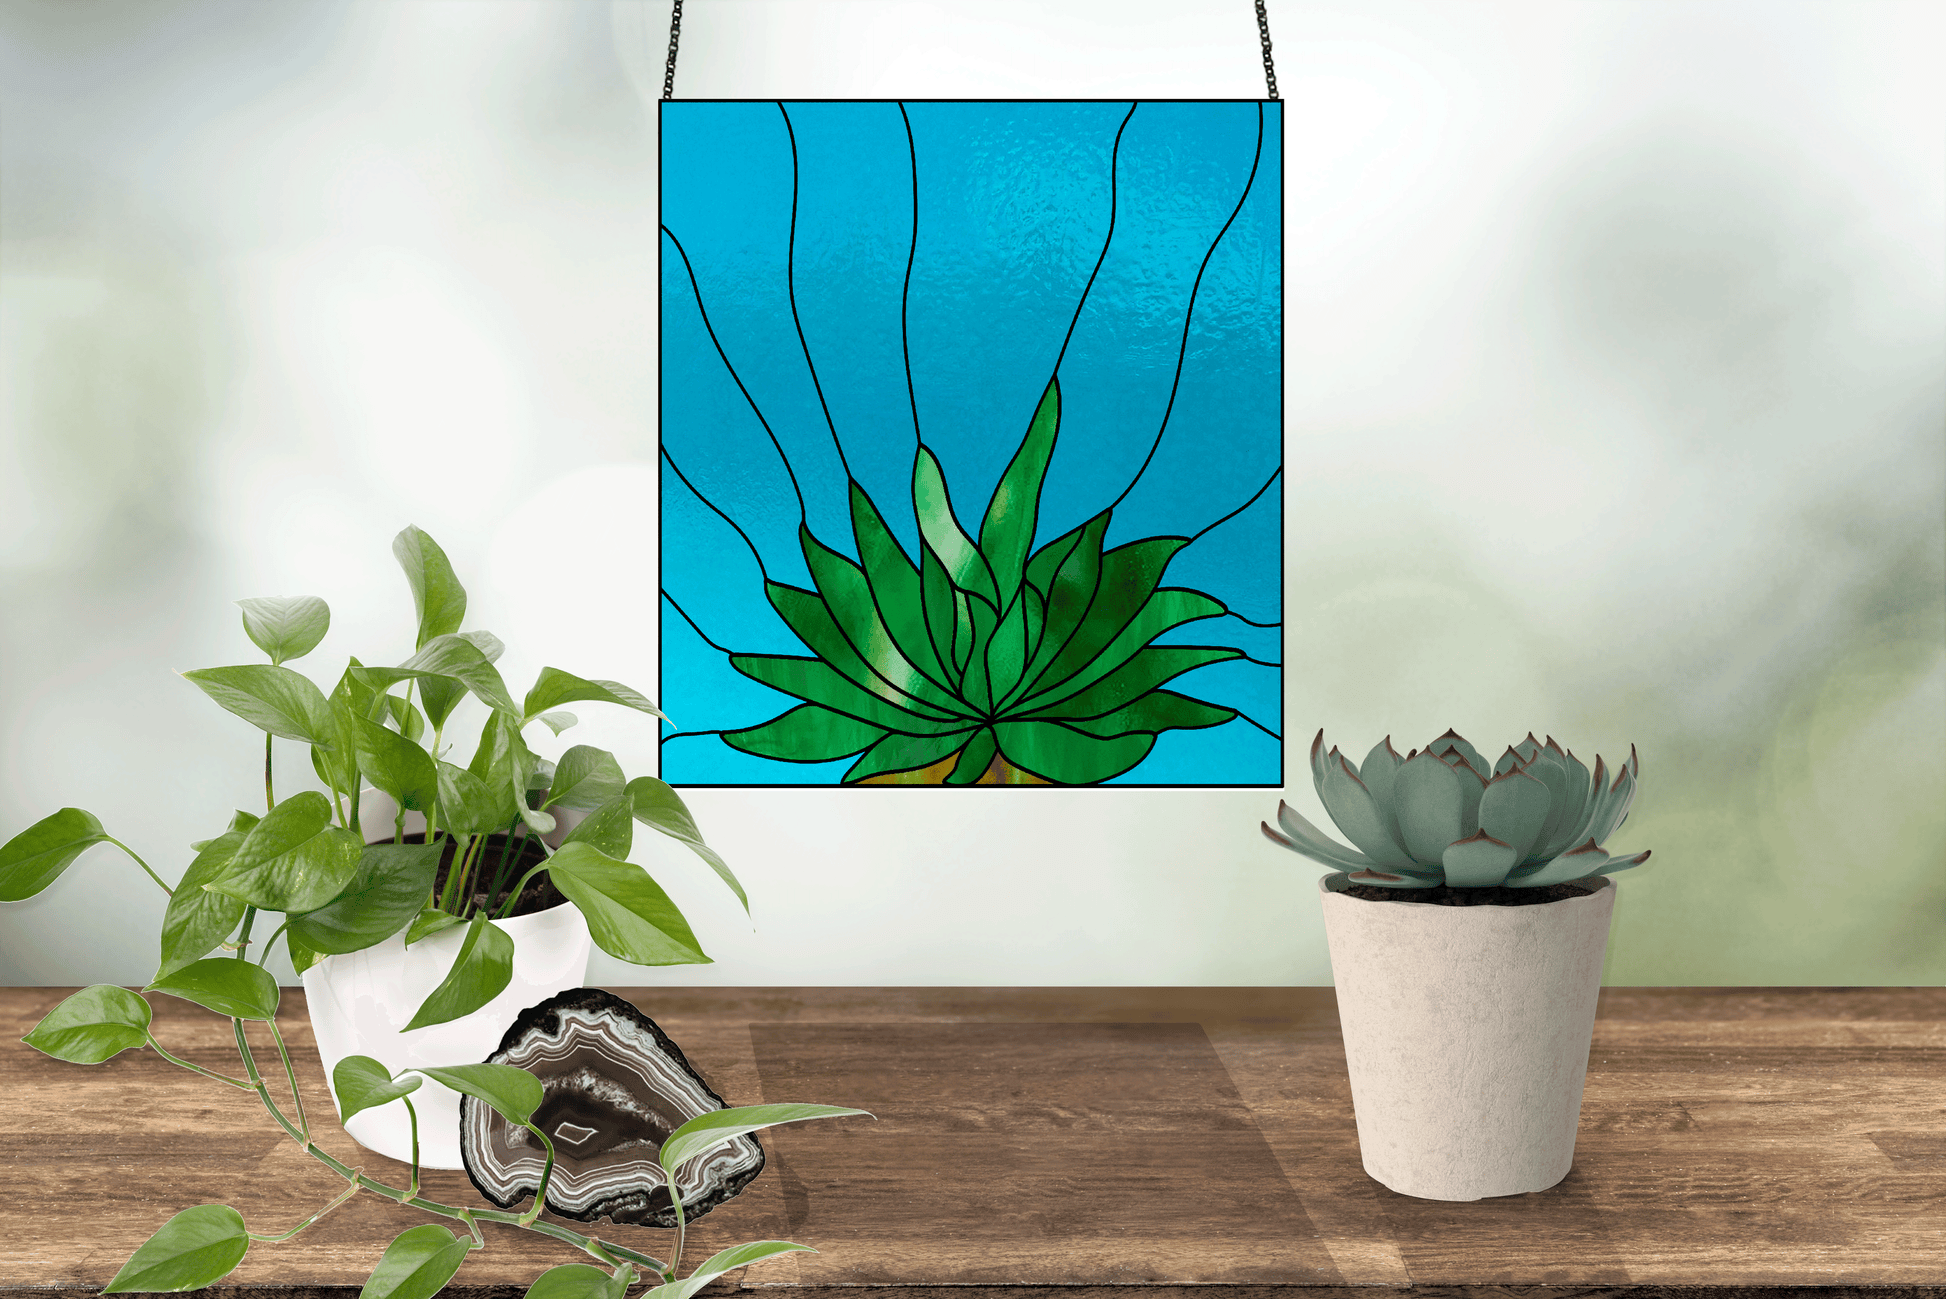 gasteria succulent panel stained glass pattern, instant pdf, shown in window with plants